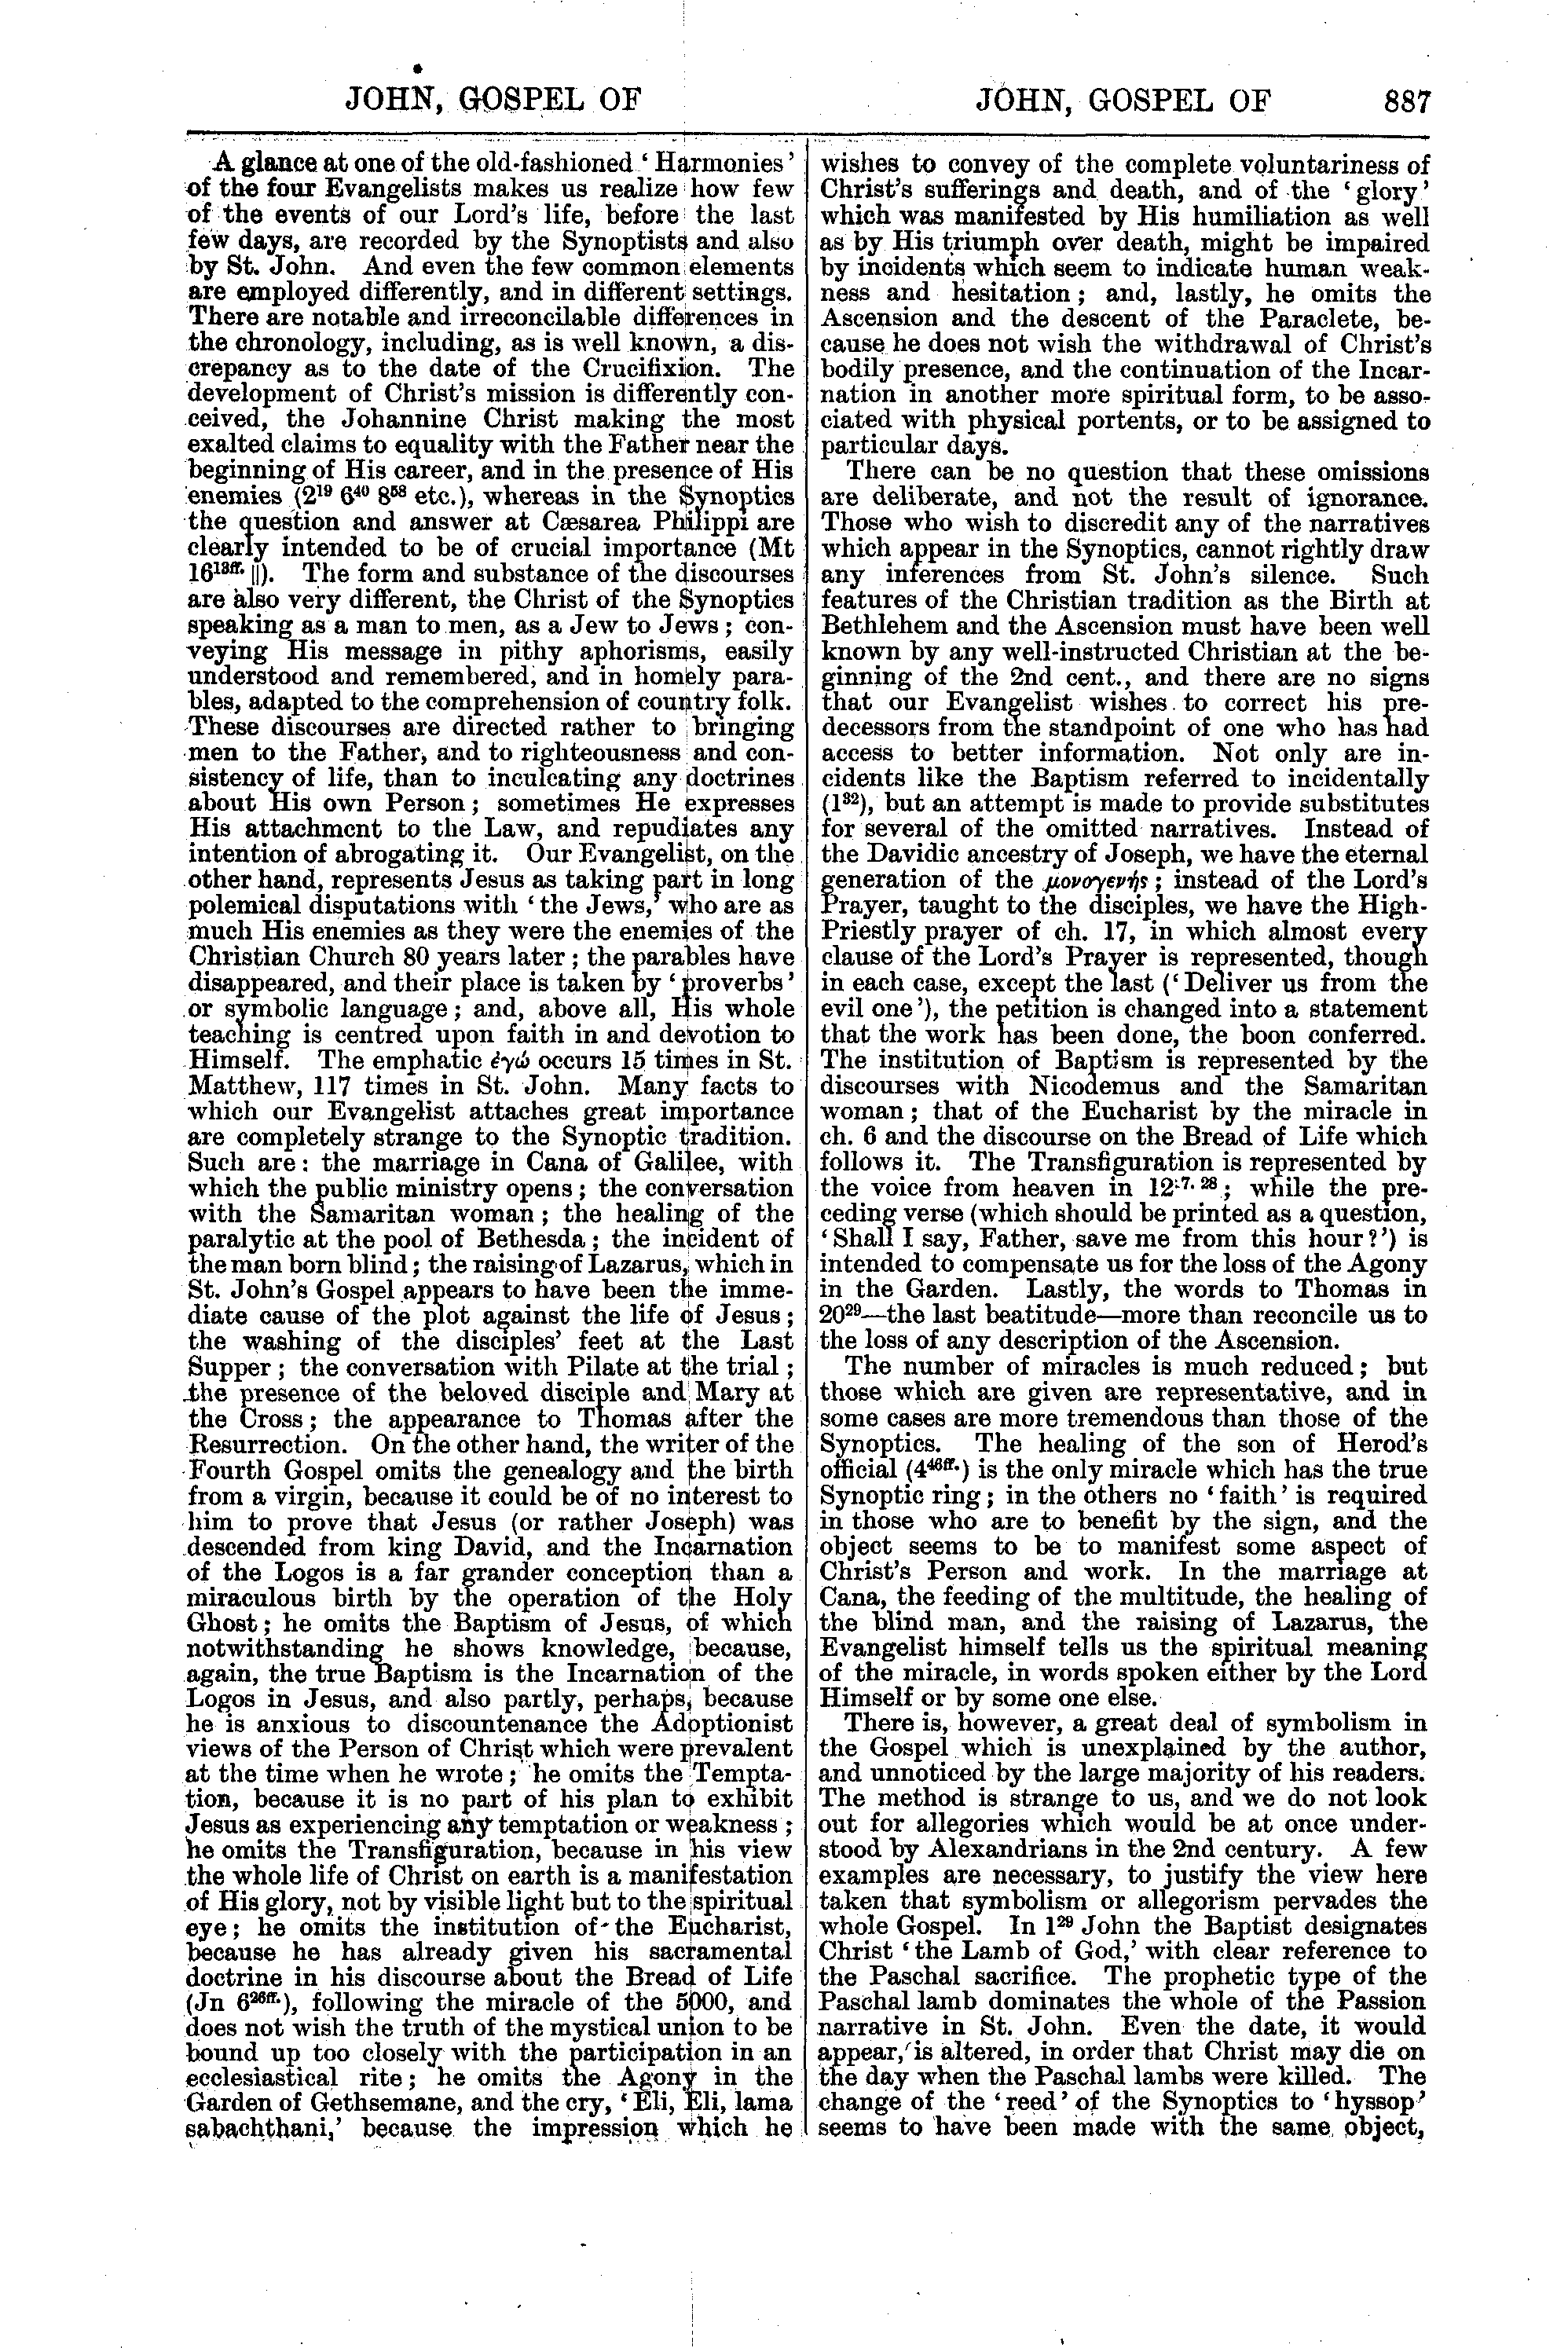 Image of page 887